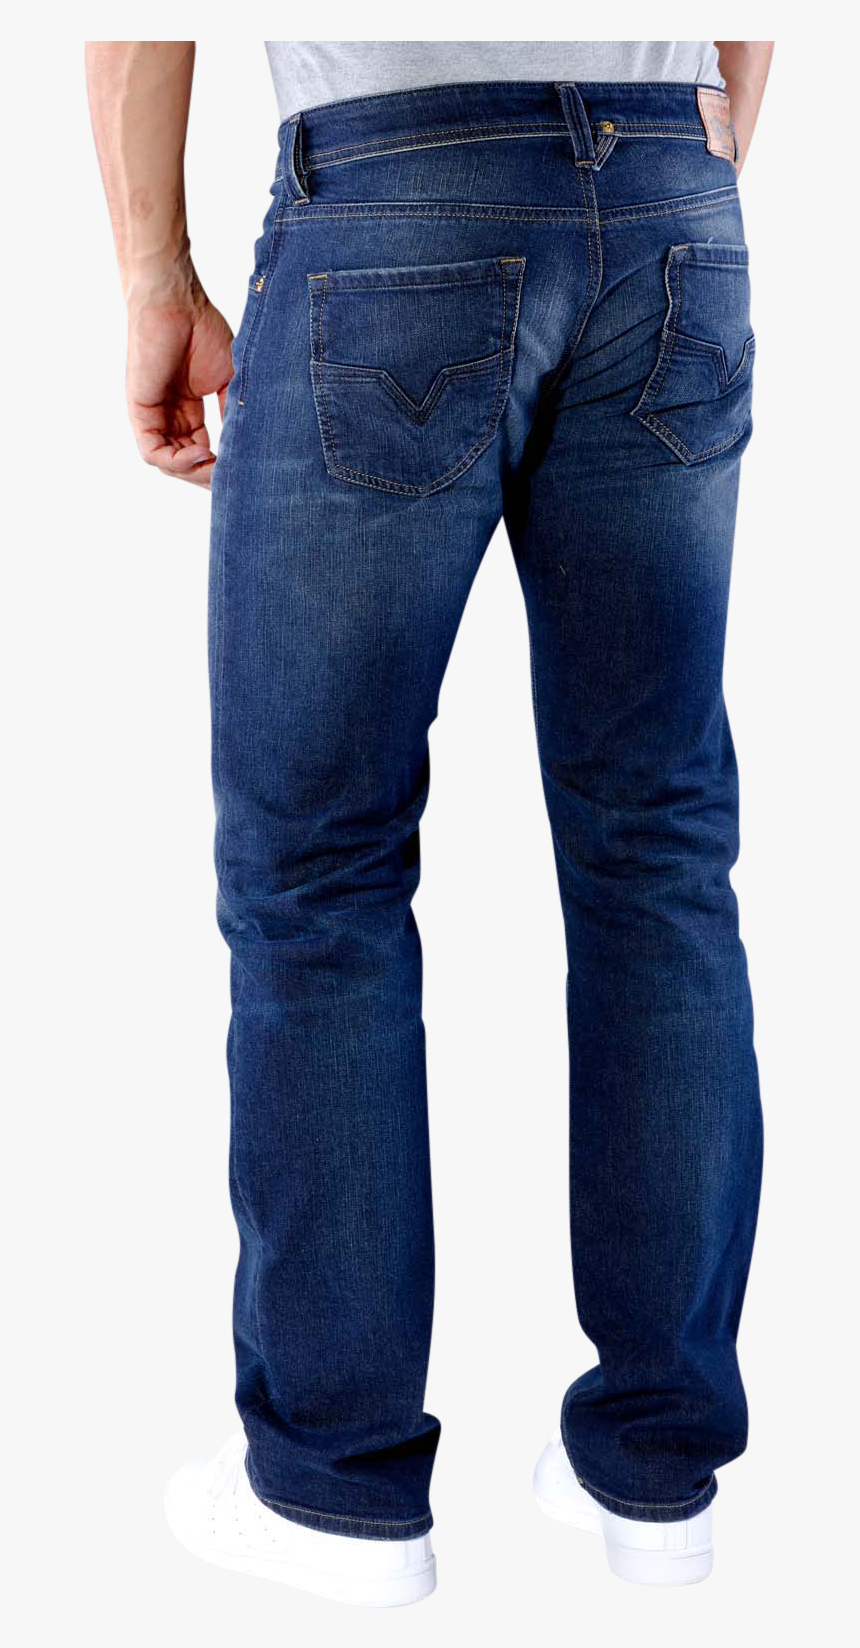 Diesel Larkee Jeans 853r - Rag And Bone Elephant Bell Jeans, HD Png Download, Free Download